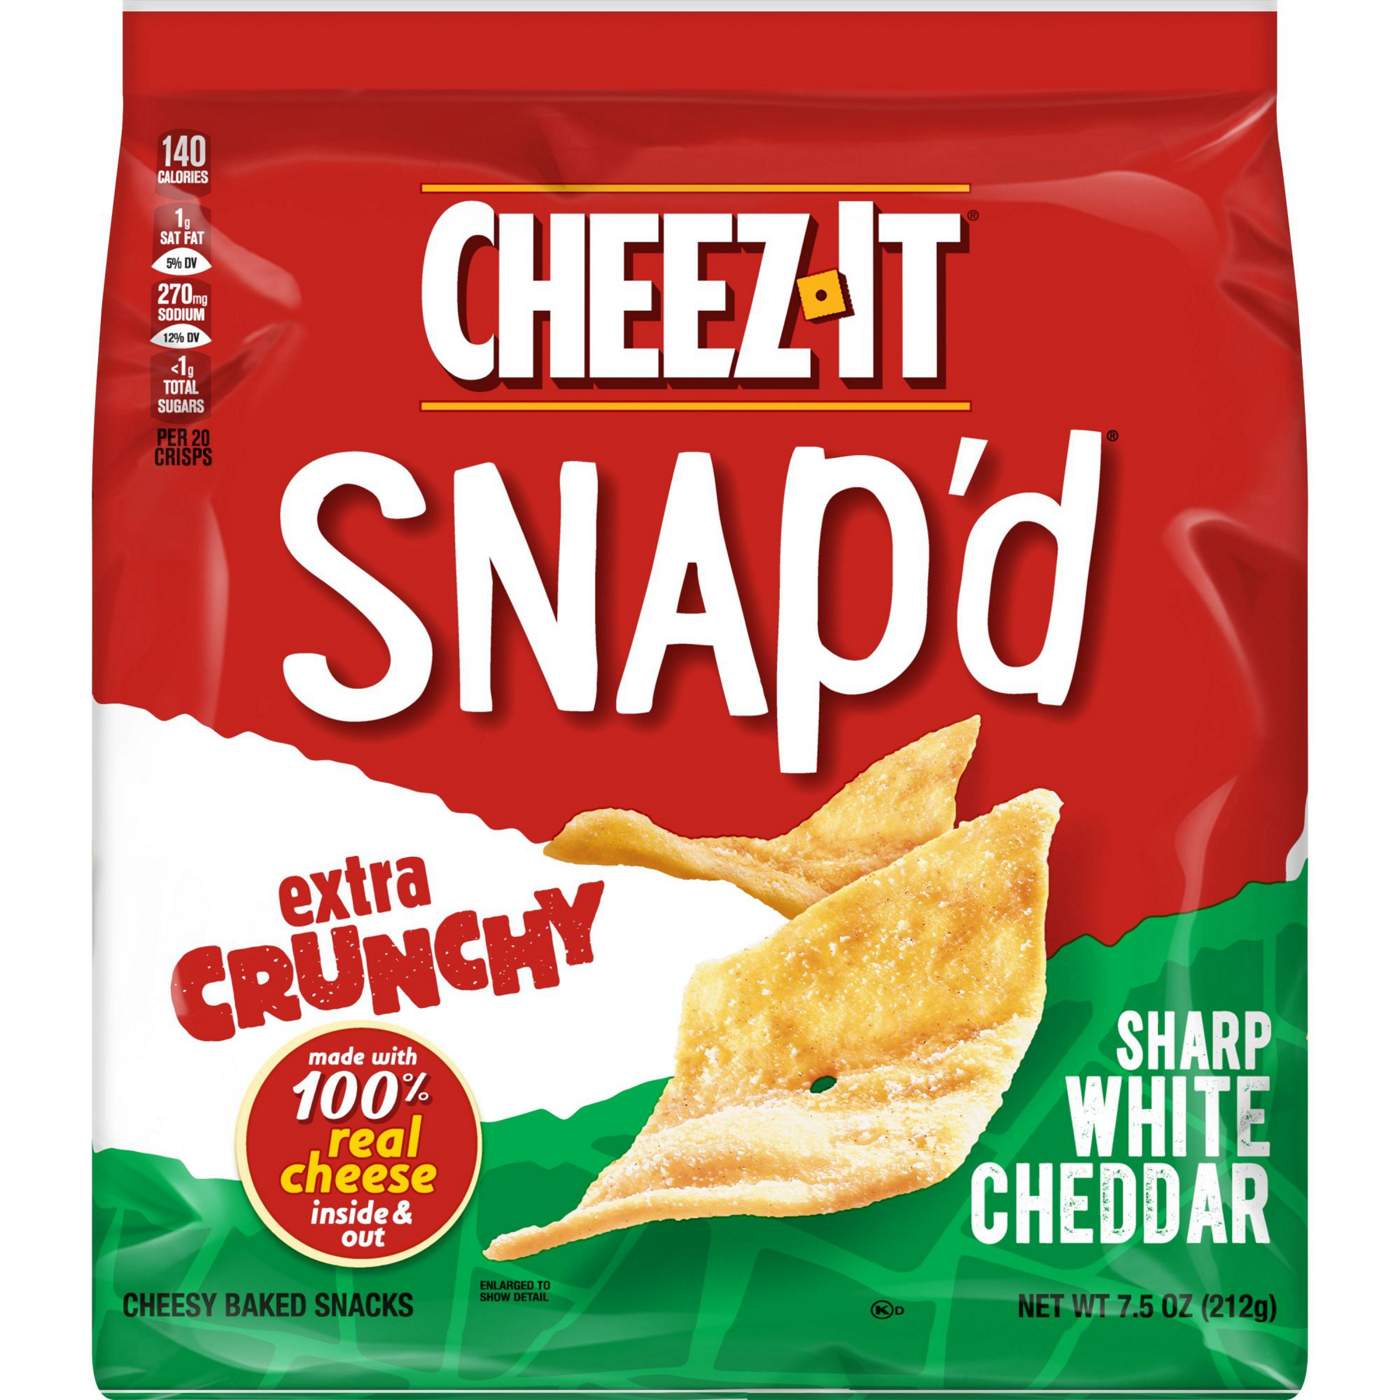 Cheez-It Snap'd Sharp White Cheddar Cheese Cracker Chips; image 1 of 3